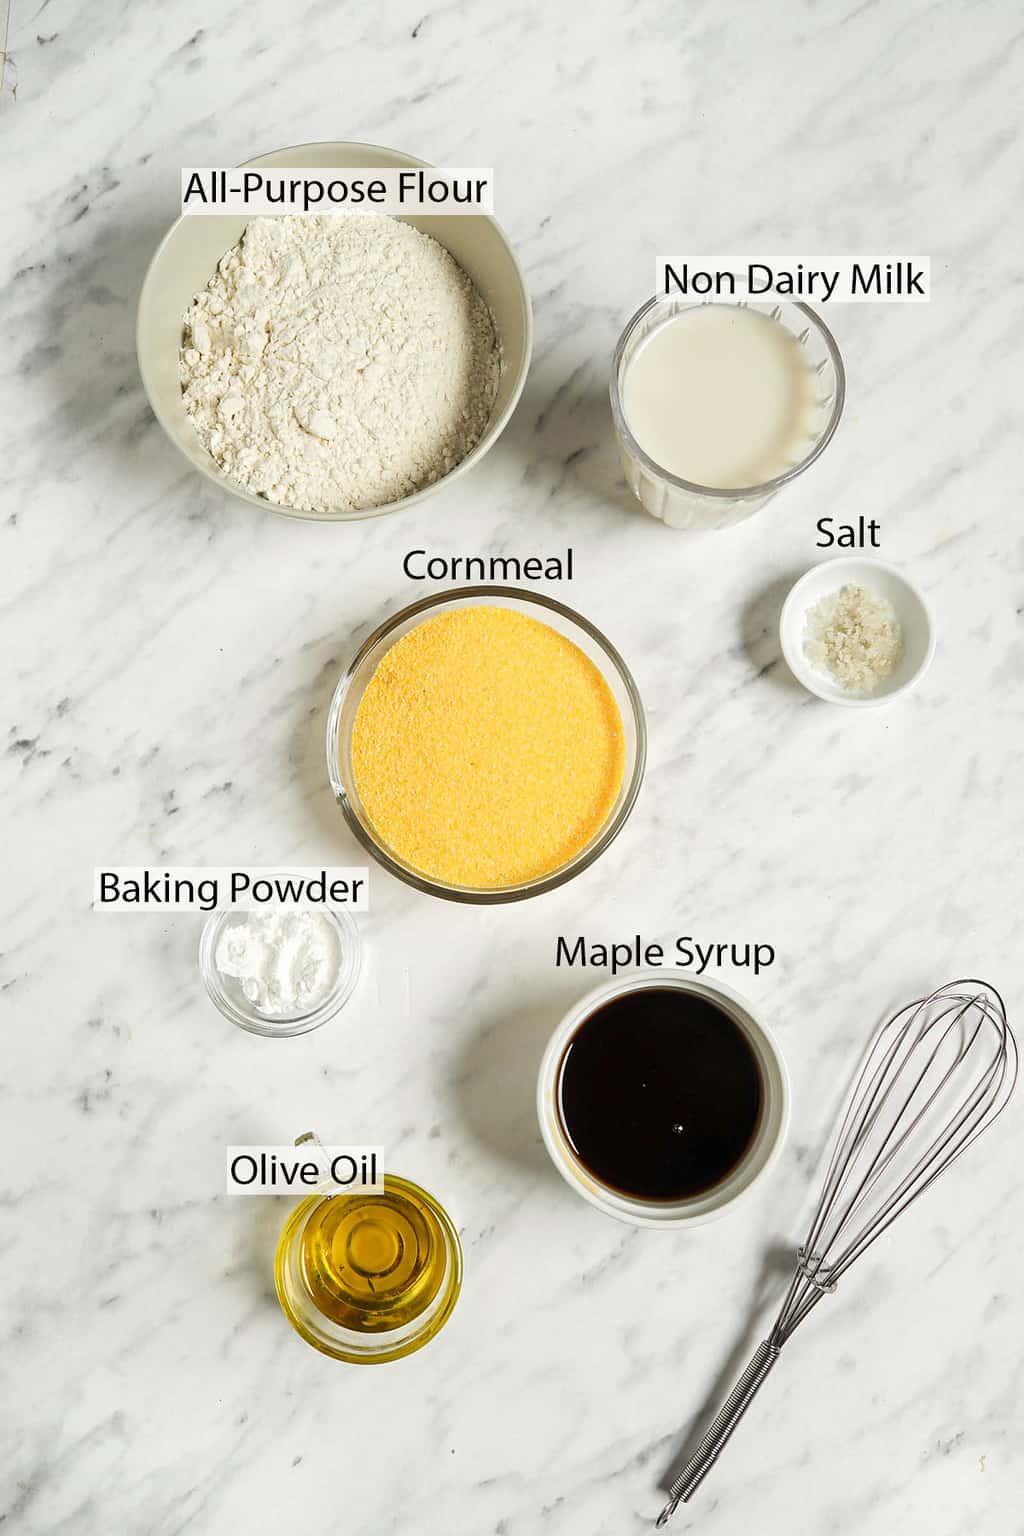 Ingredients for cornbread muffins measured out and placed on a marble countertop.